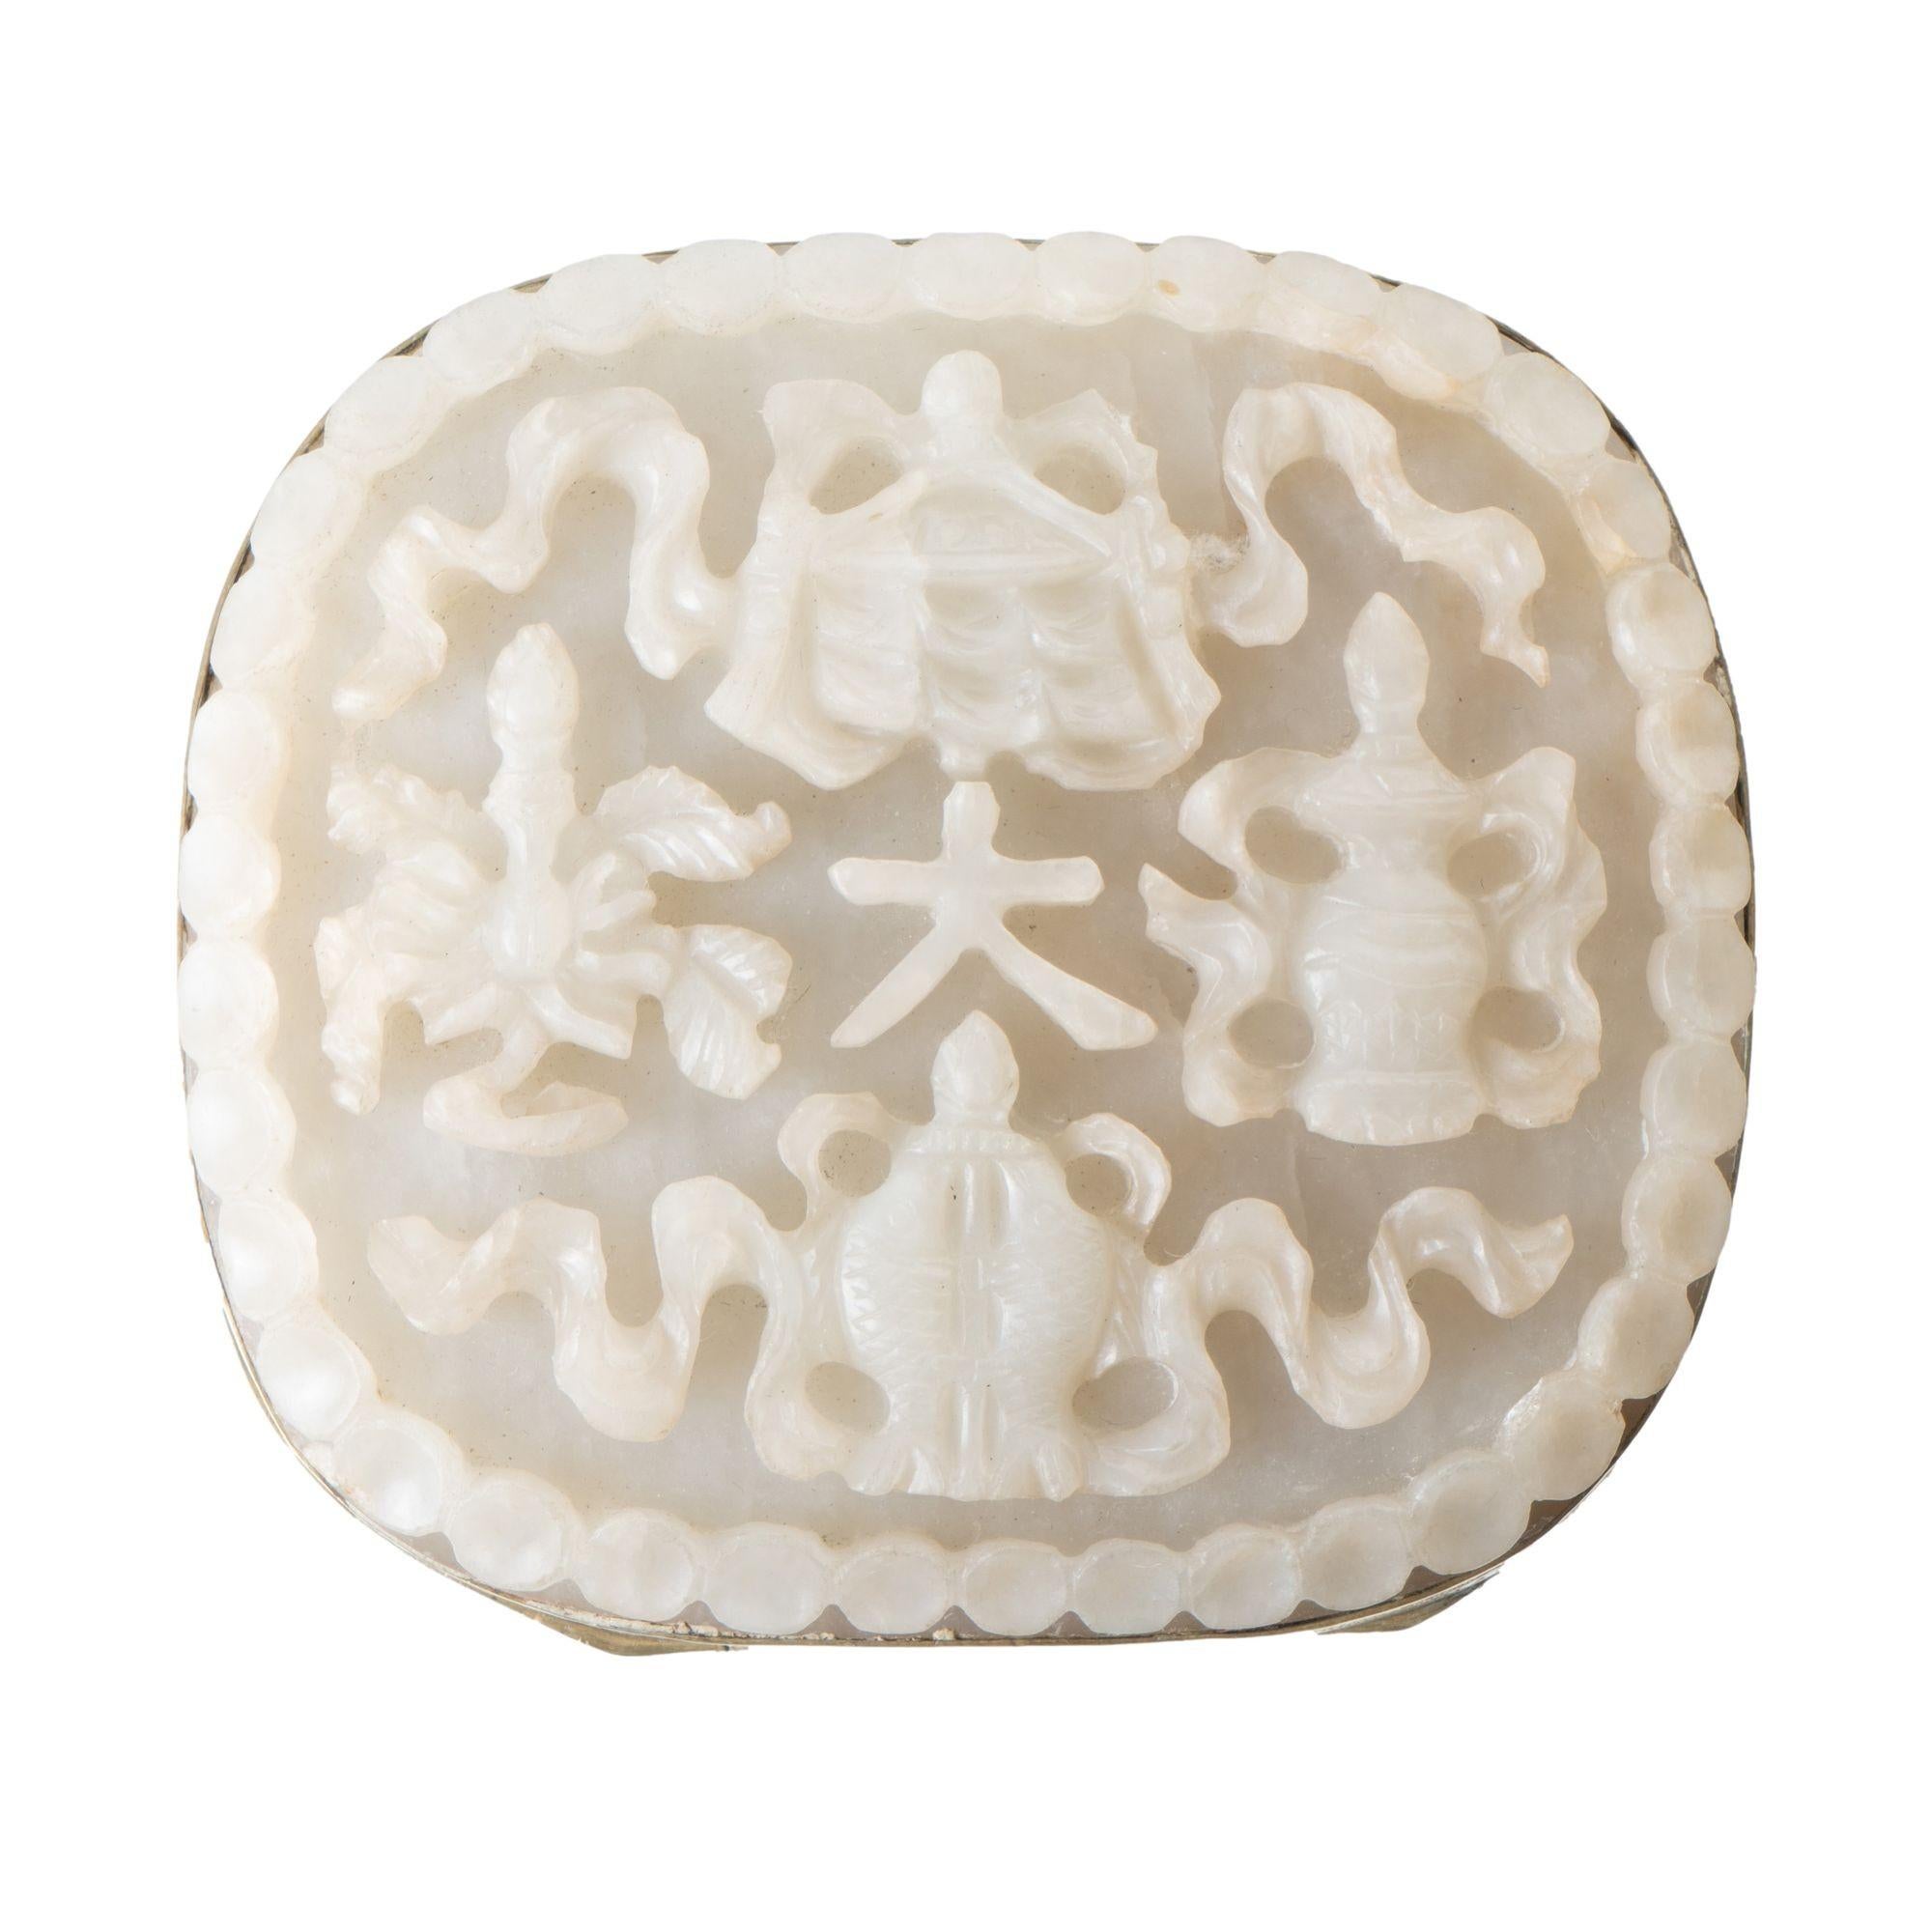 Antique carved nephrite white jade from a ruyi, mounted to the hinged lid of a conforming brass box. The inside of the lid and outer surfaces are engraved with propitious symbols.
China, made for the American market, circa 1893.